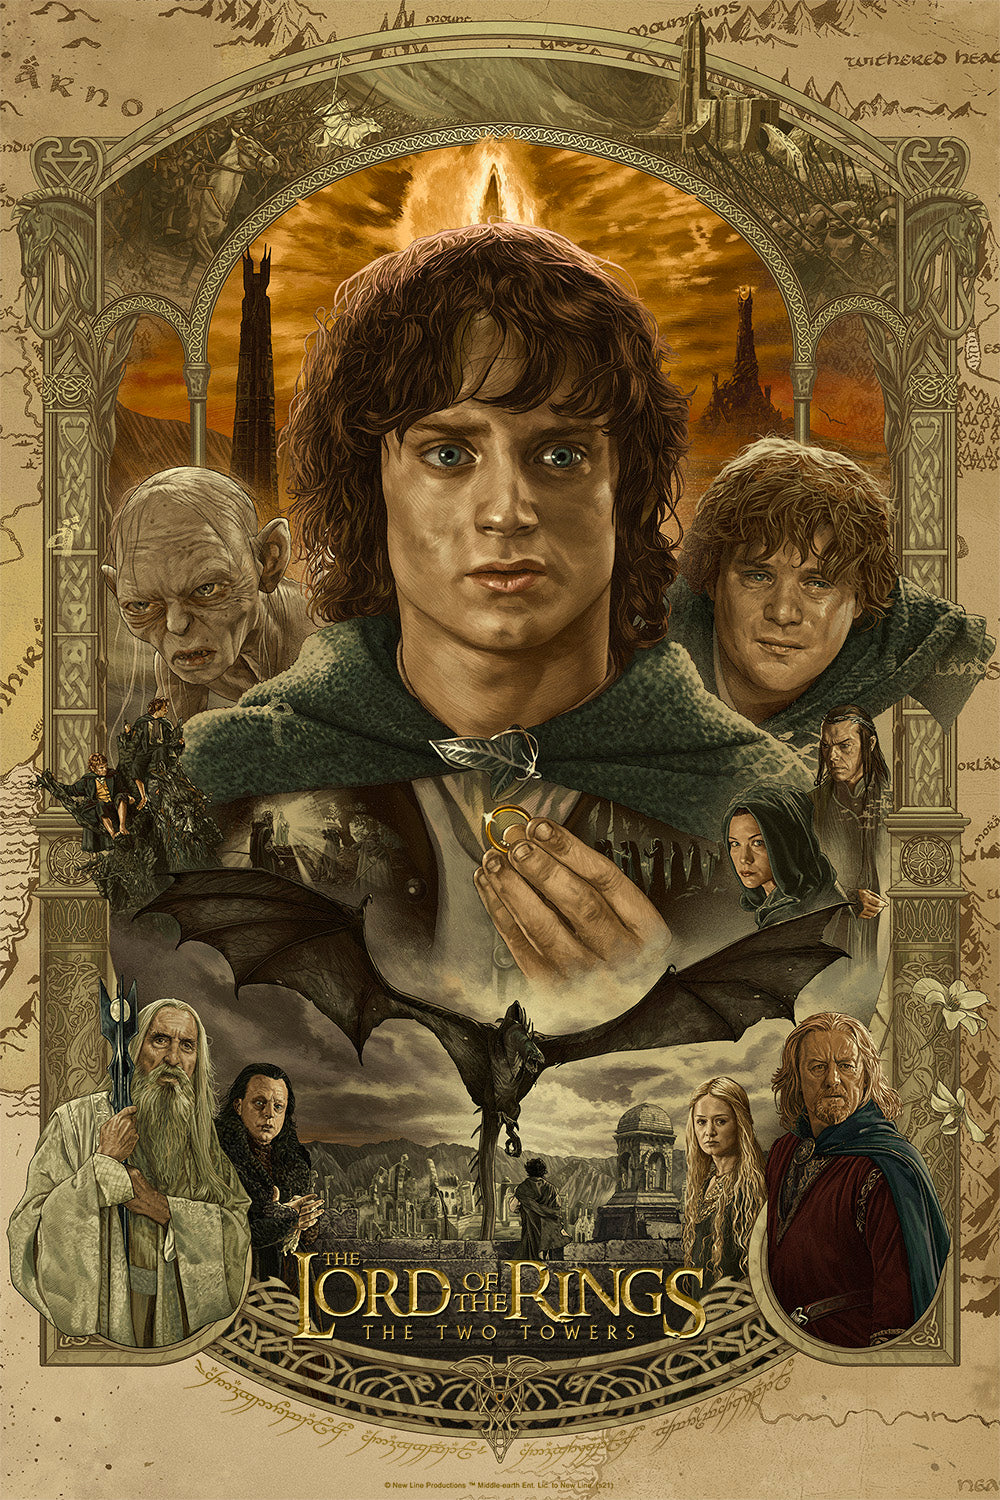 Juan Burgos "The Lord of the Rings: The Two Towers" Timed Edition